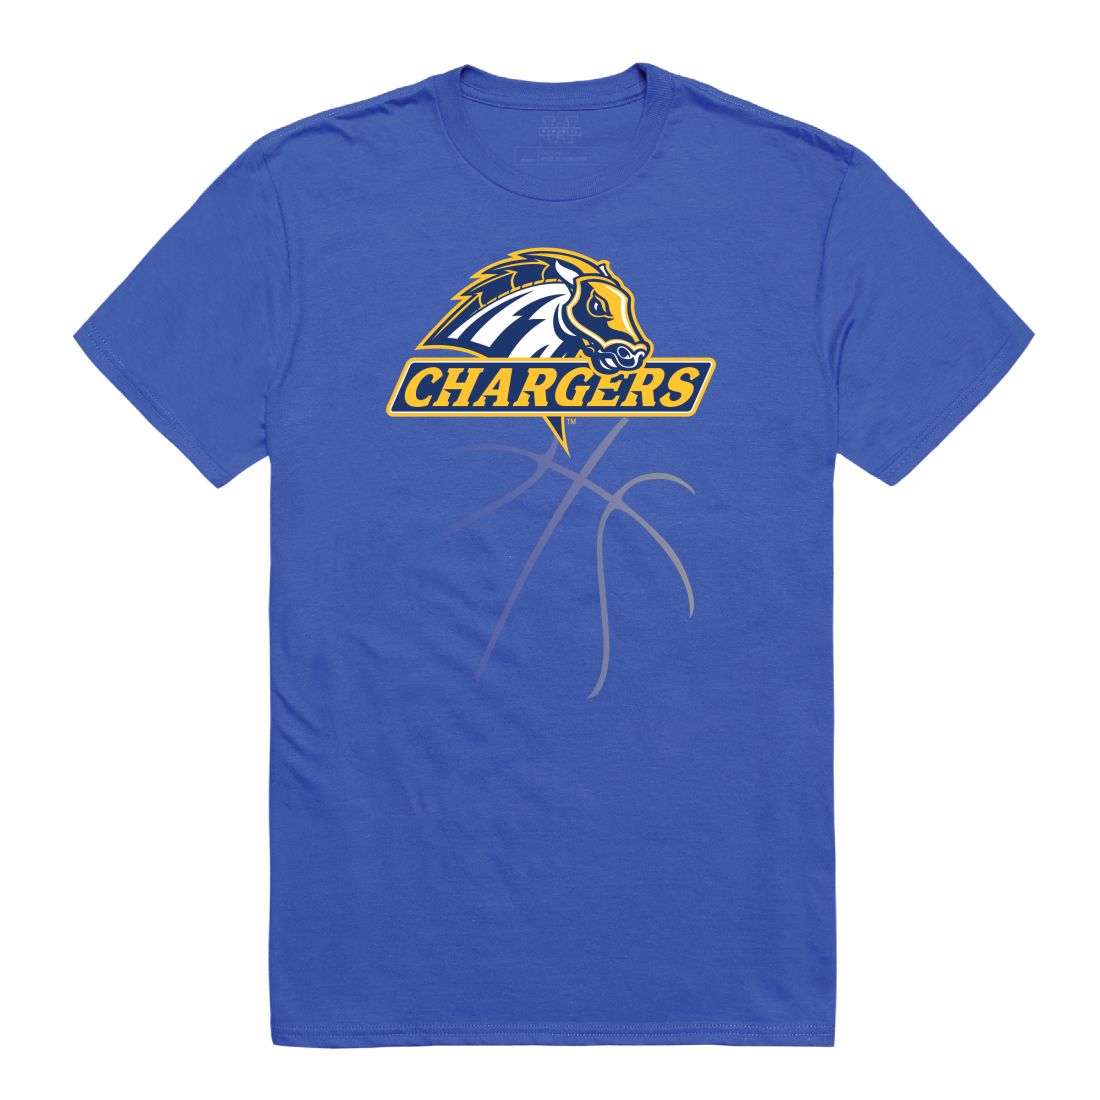 University of New Haven Chargers Basketball T-Shirt